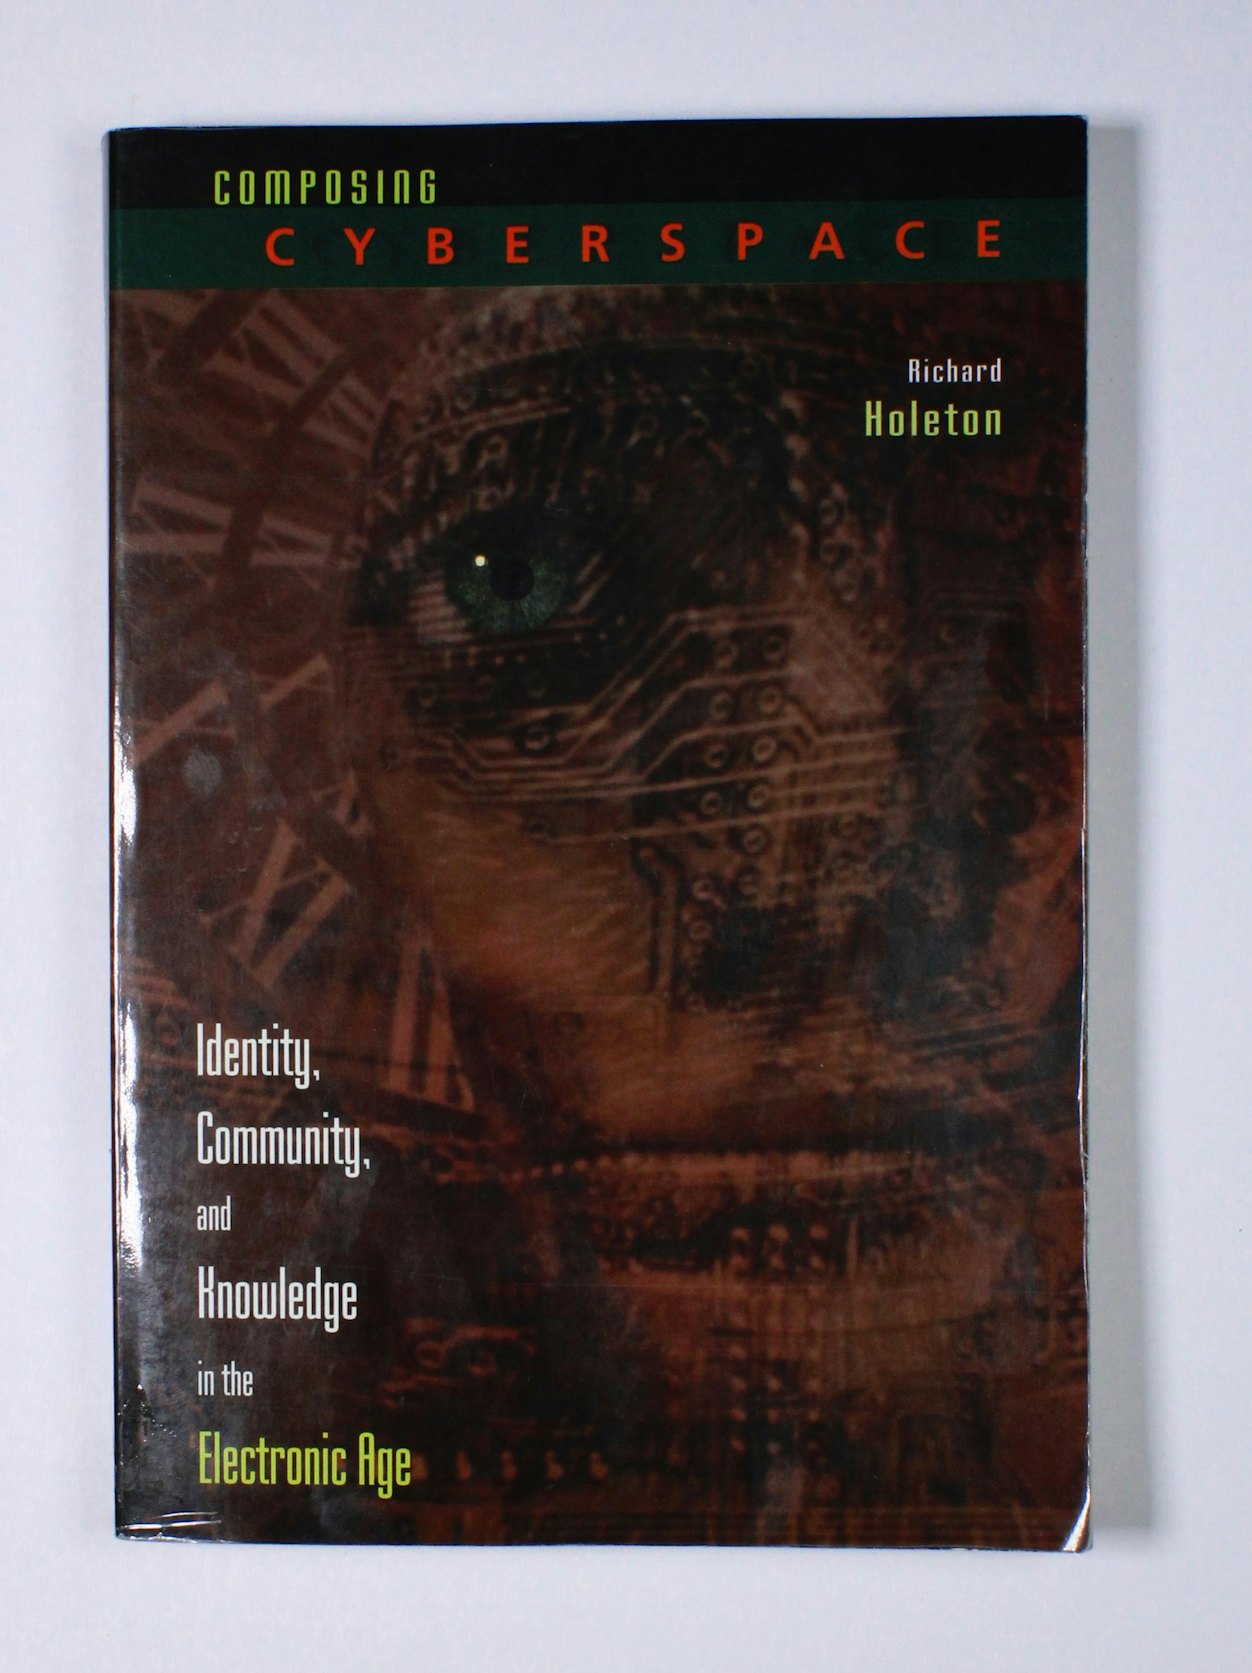 Composing Cyberspace: Identity, Community, and Knowledge in the Electronic Age